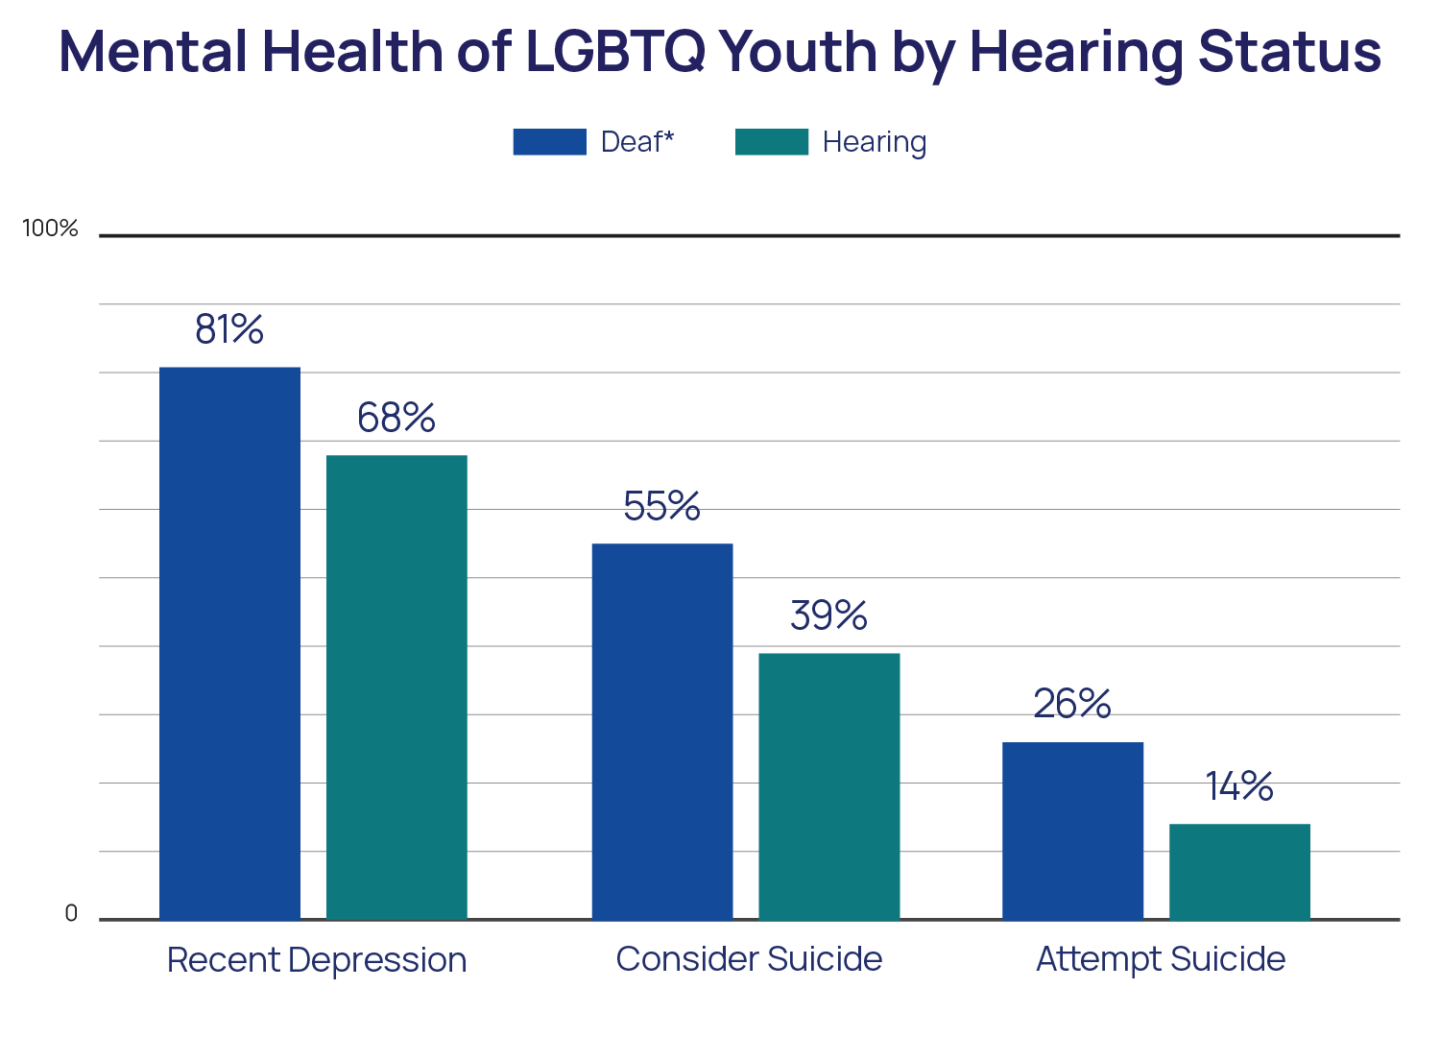 Mental Health of LGBTQ Youth by Hearing Status